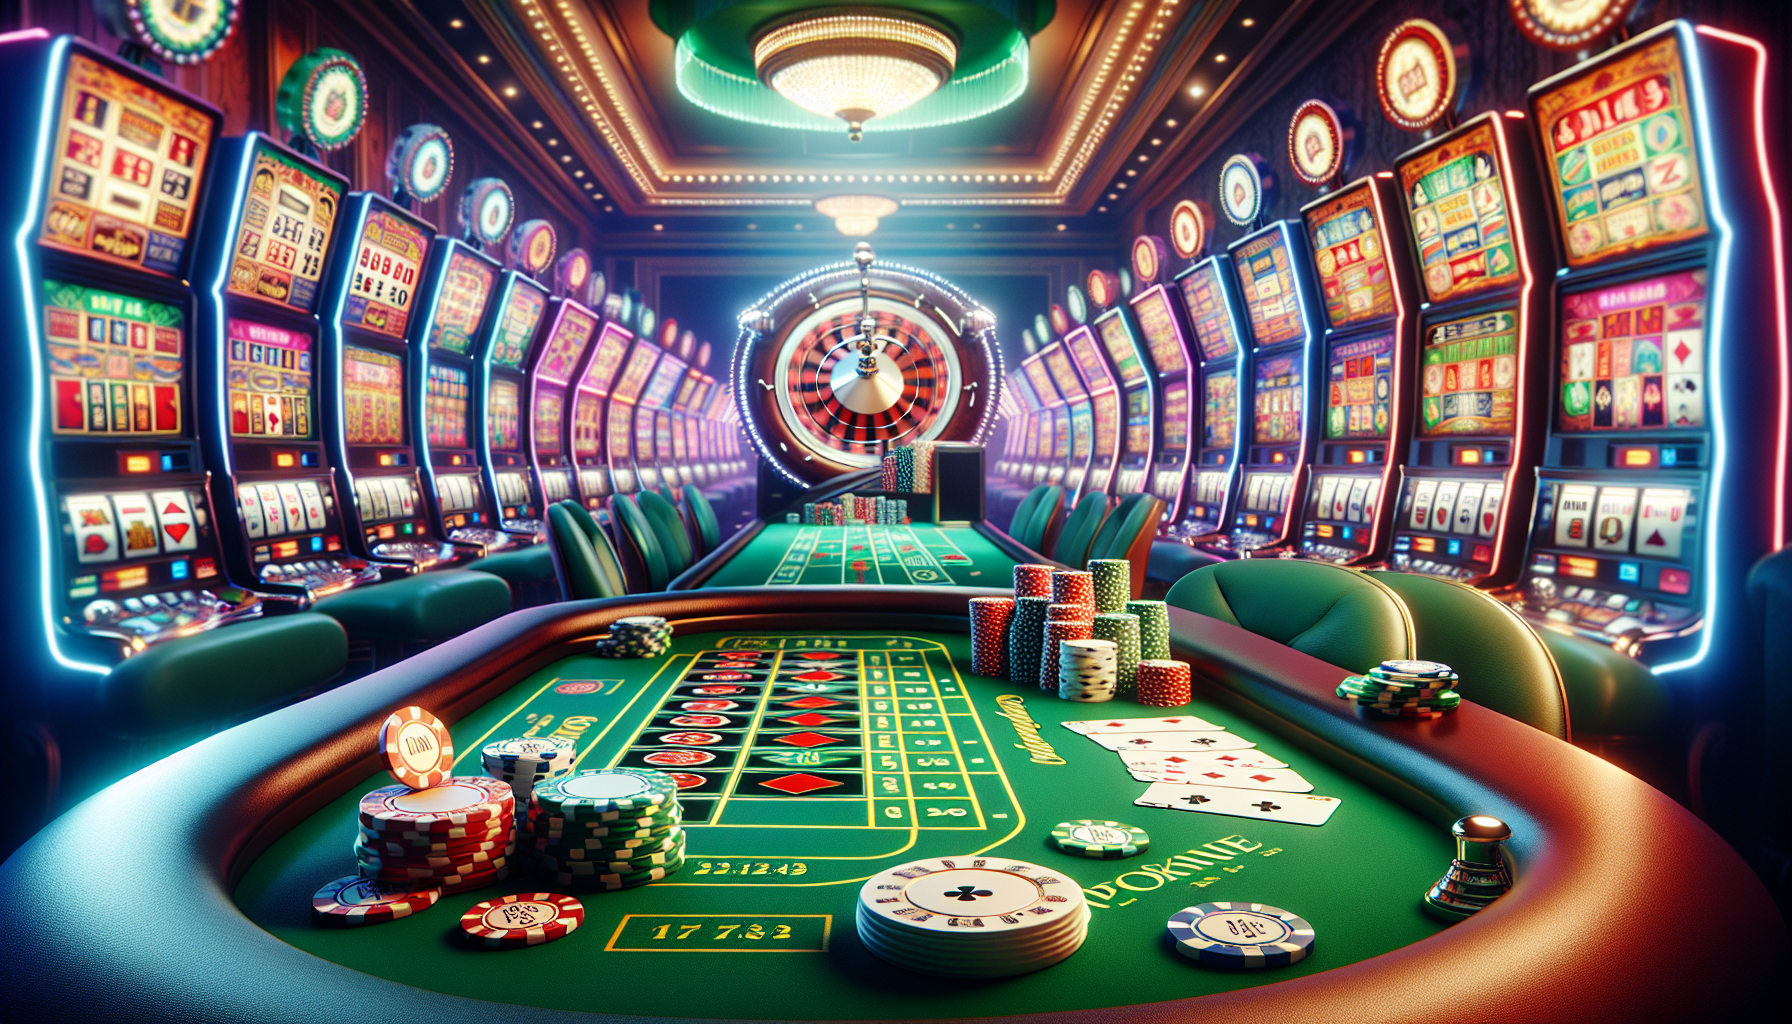 Exciting real money casino games